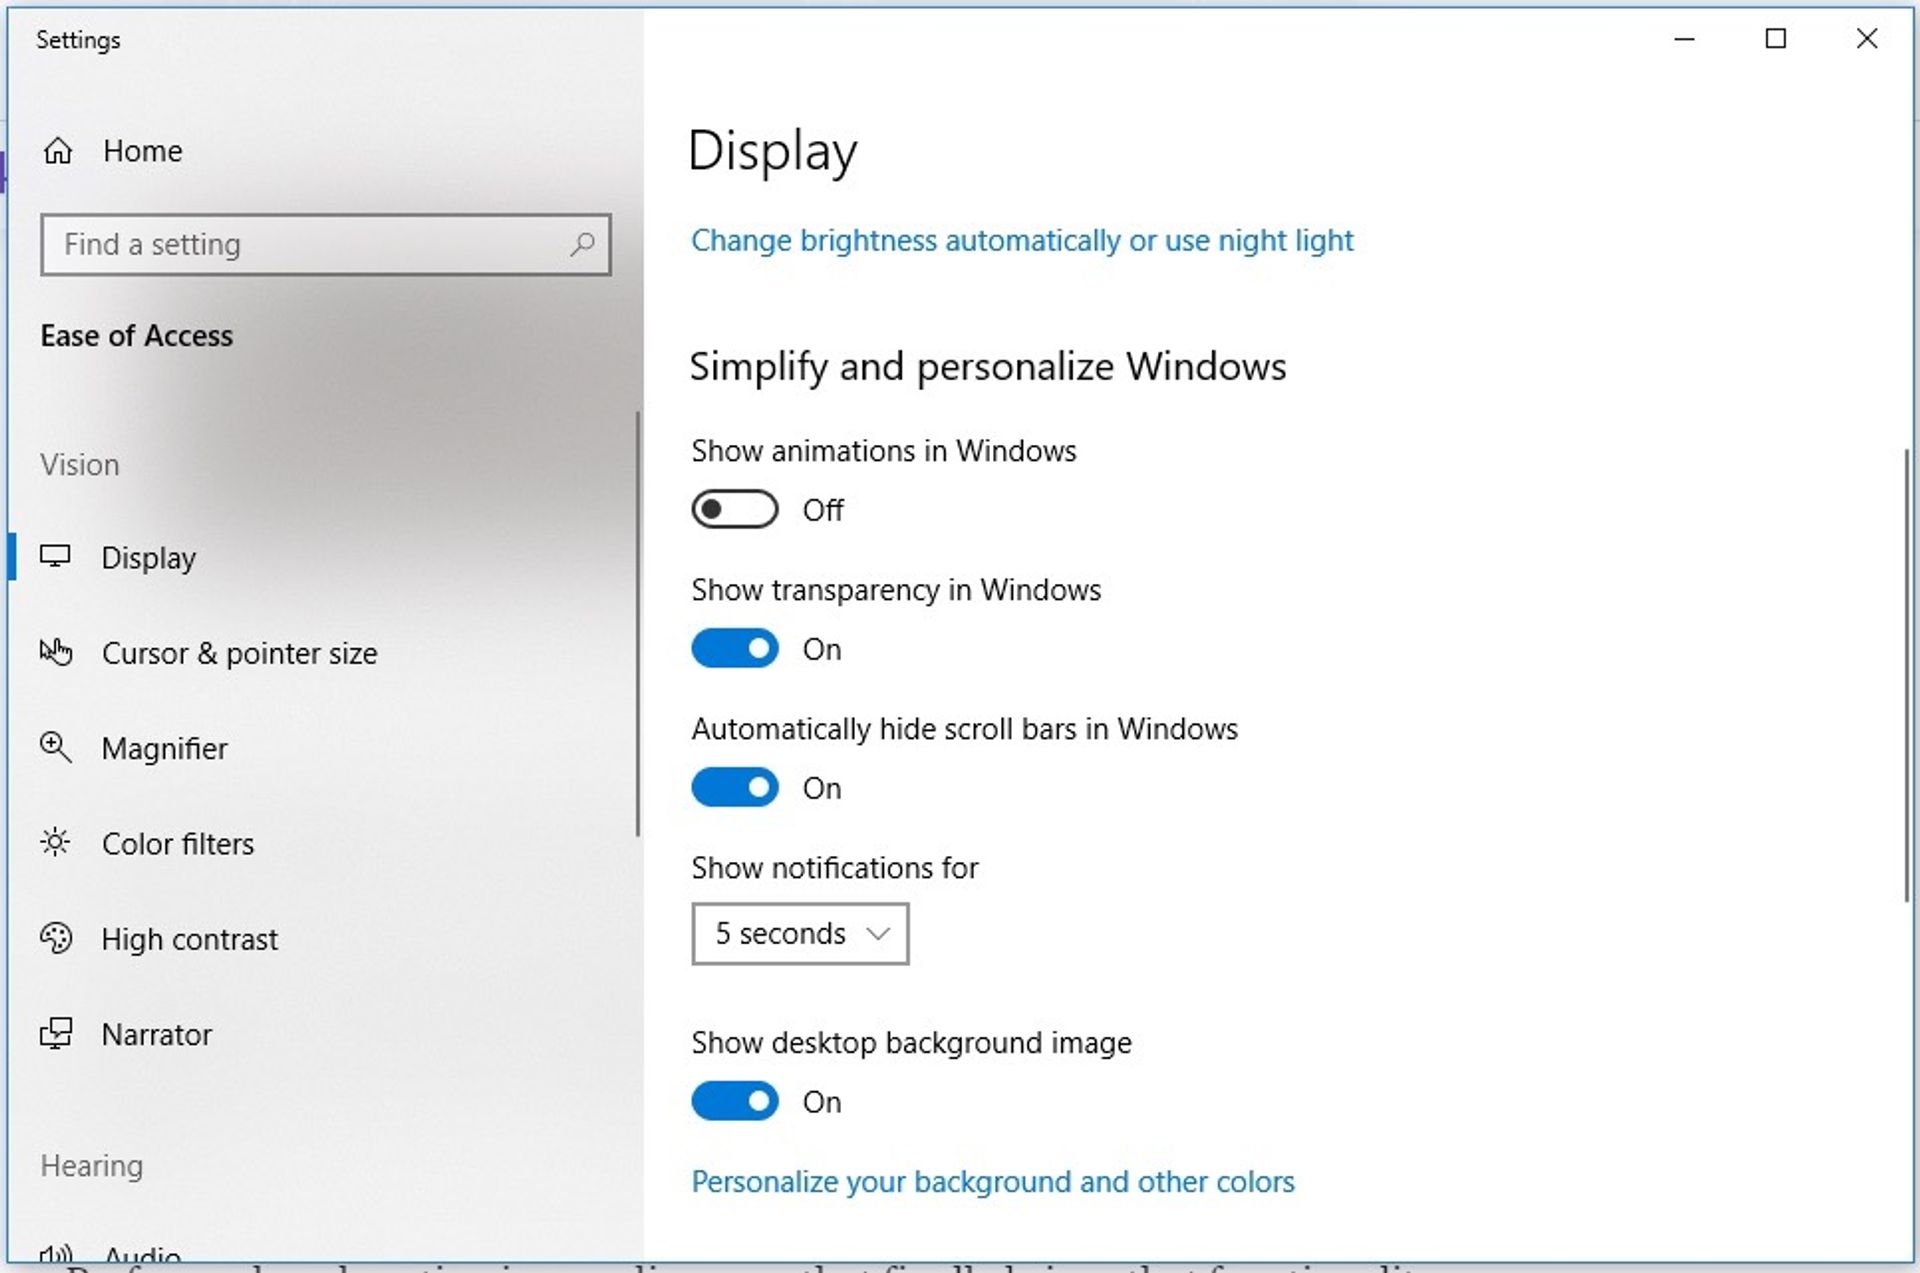 Screenshot showing how to turn off animations in Windows10, on the screen are display settings. Drawing attention to the animation setting which is toggled off